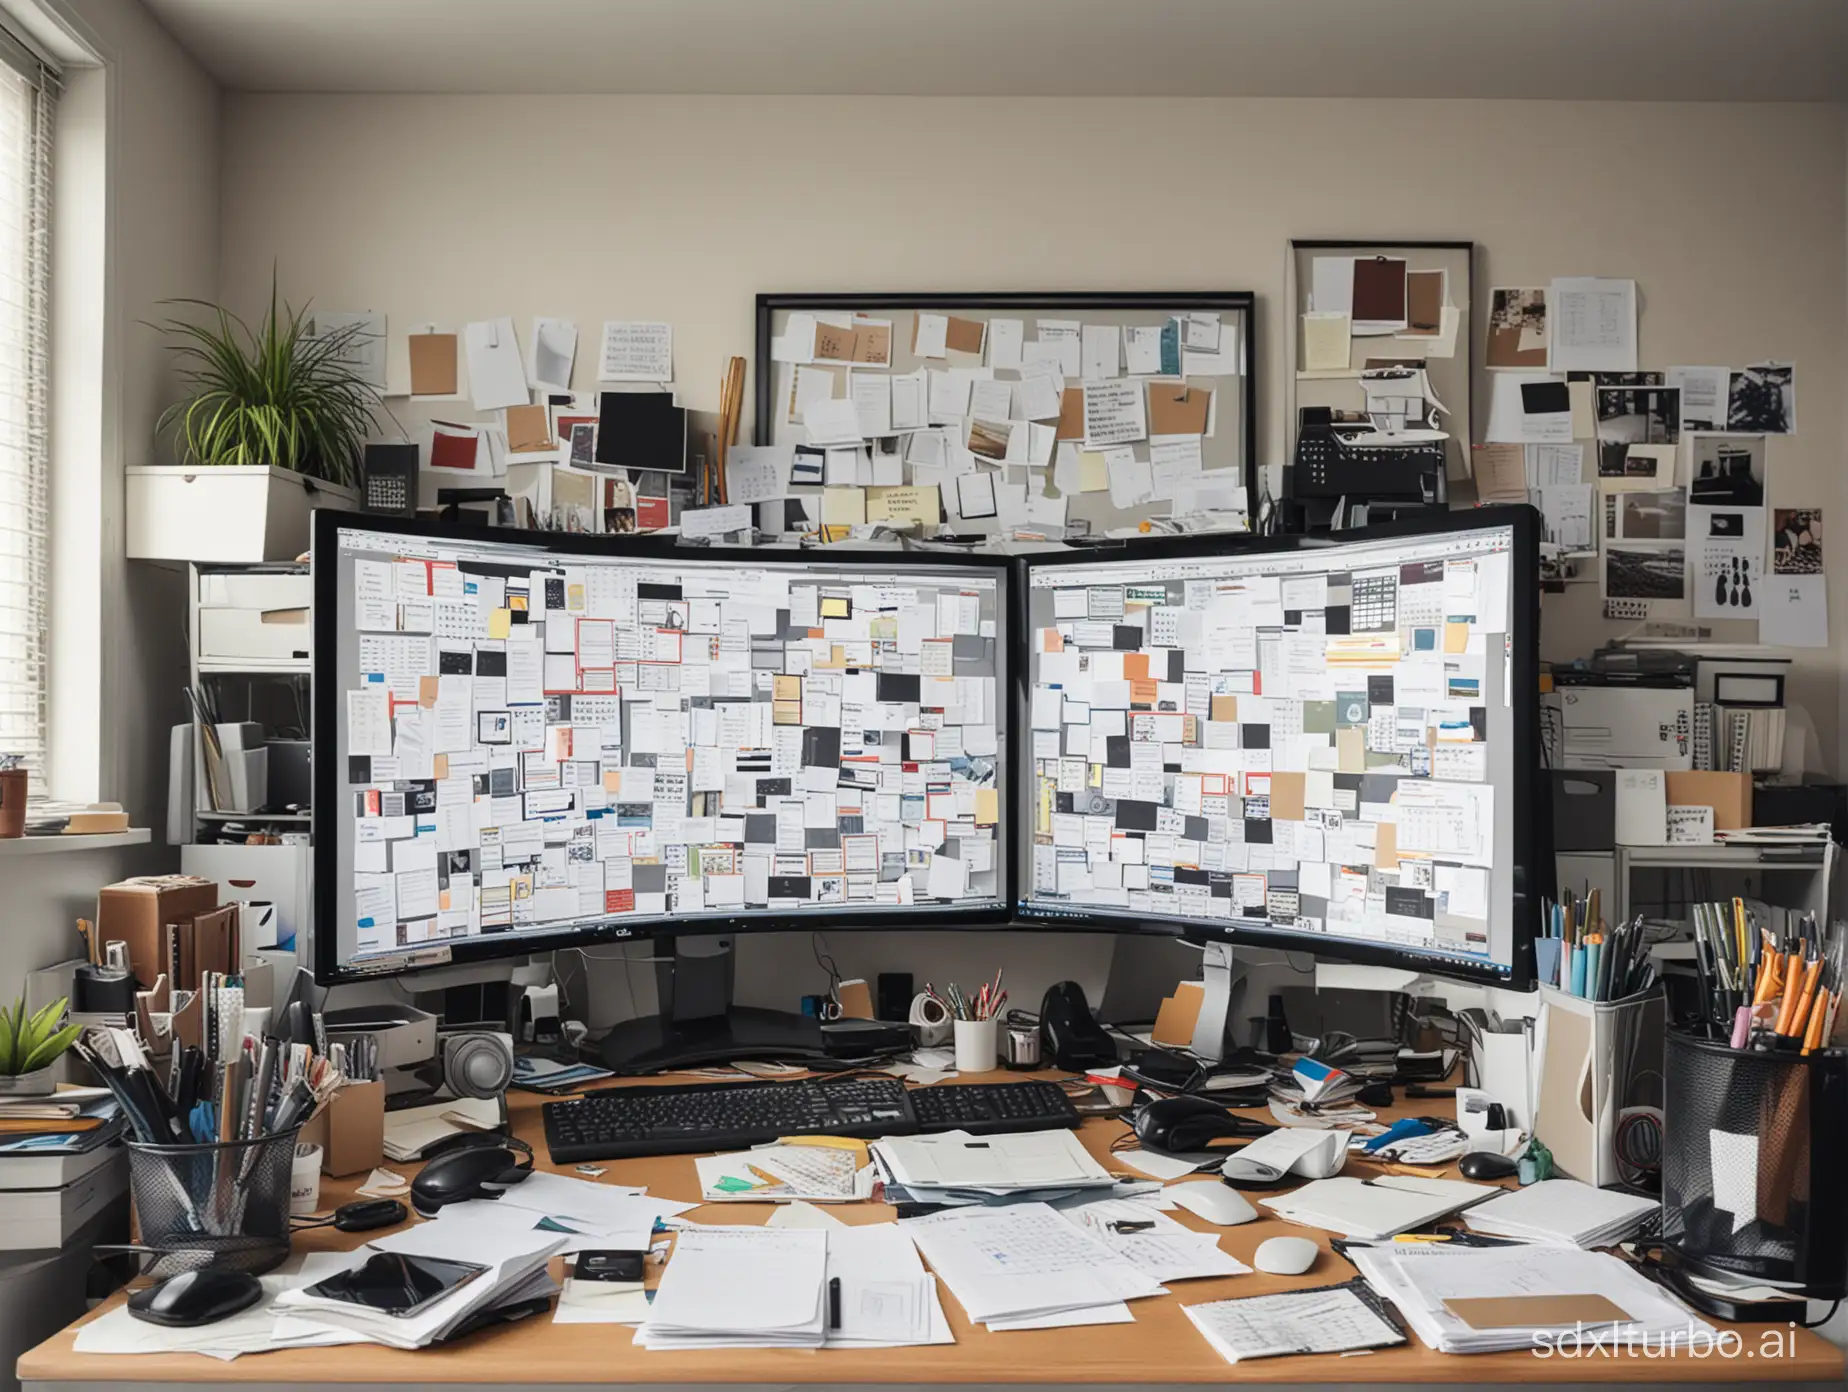 Disorganized office, big monitor in the center, containing many things